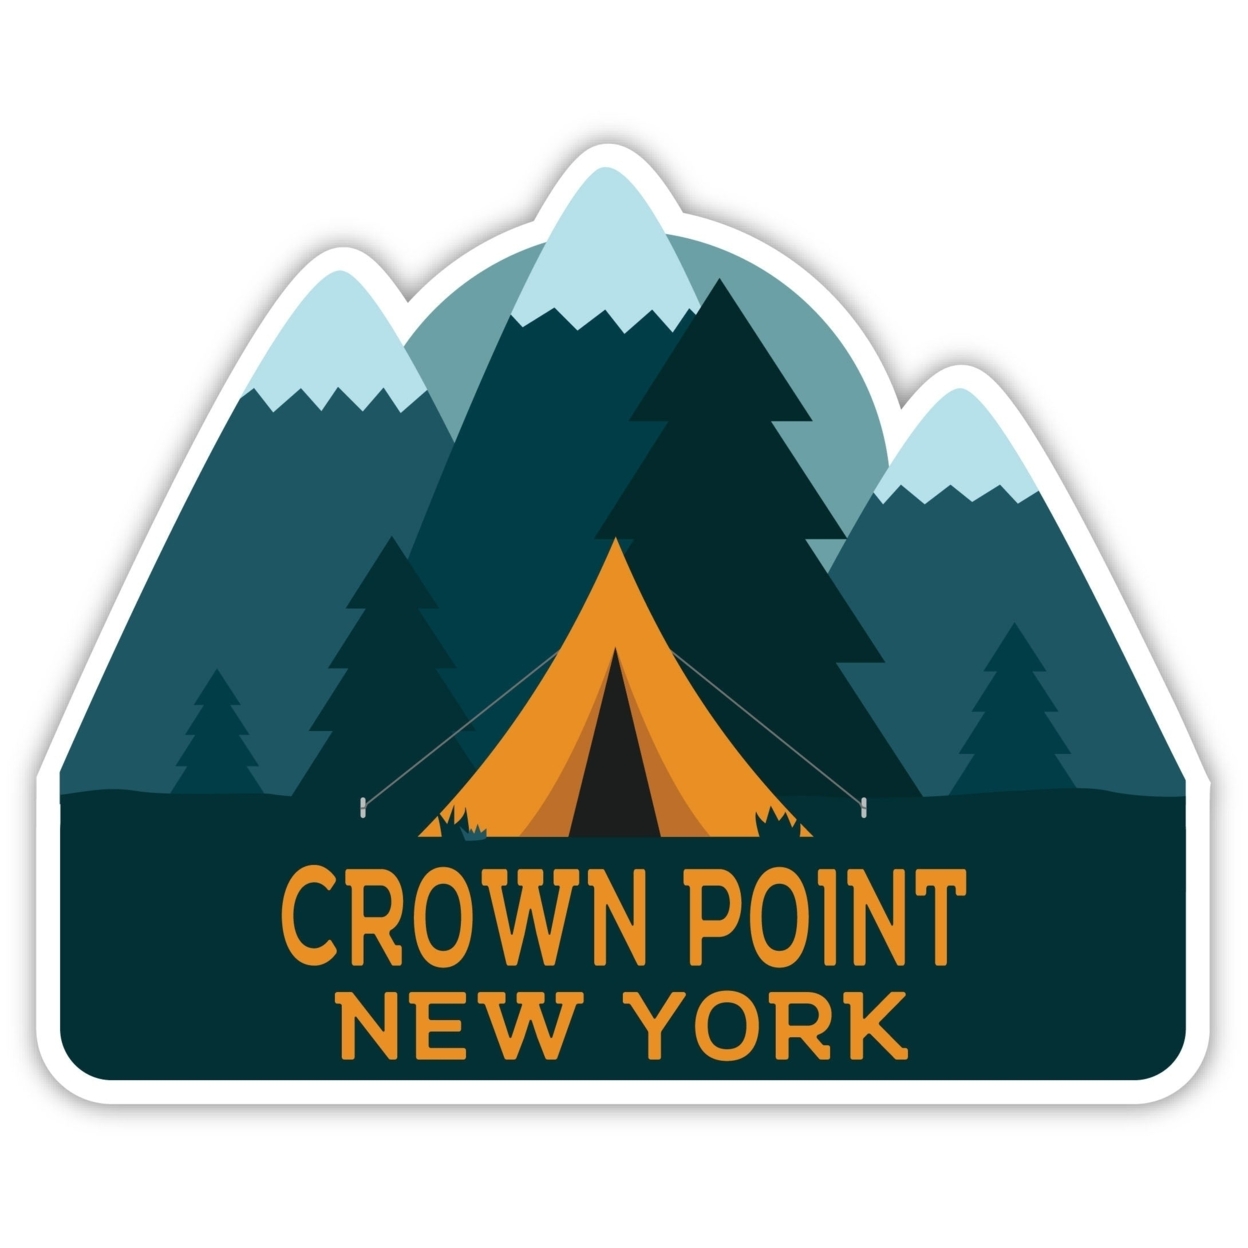 Crown Point New York Souvenir Decorative Stickers (Choose Theme And Size) - 4-Pack, 6-Inch, Tent